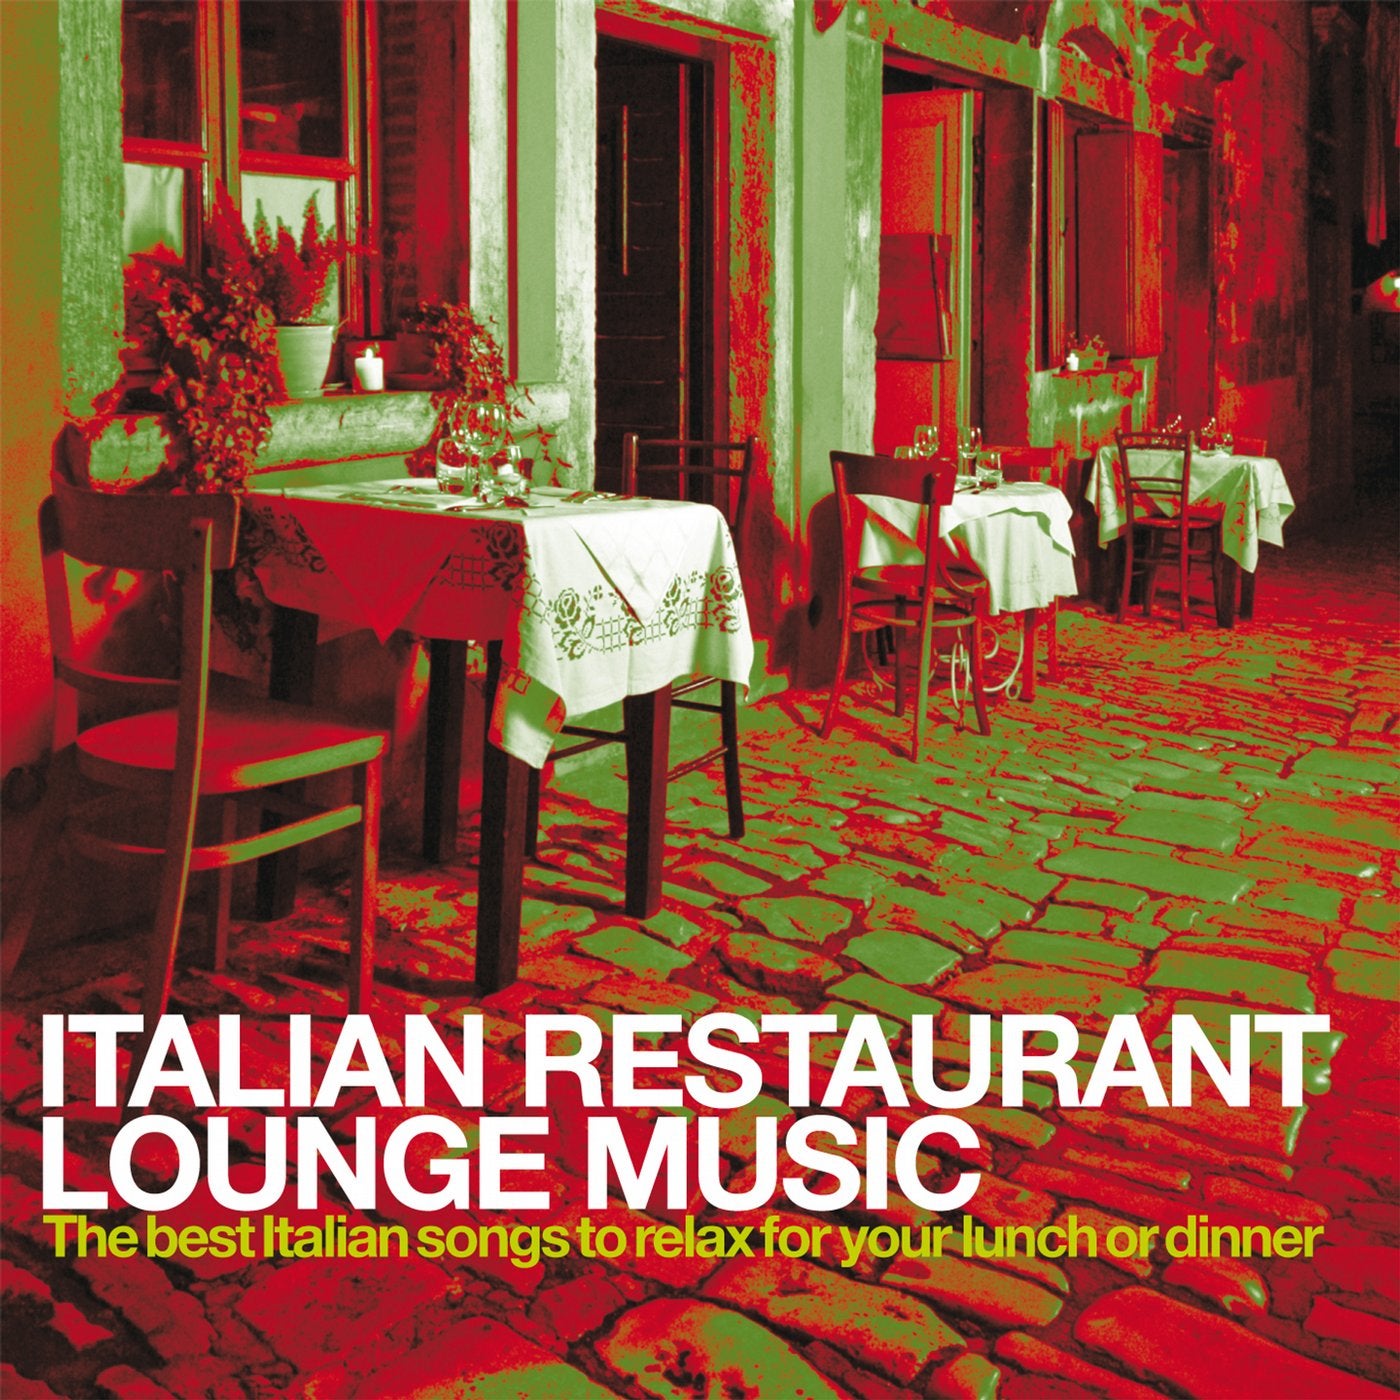 Italian Restaurant Lounge Music - The best Italian Songs to relax for your lunch or dinner